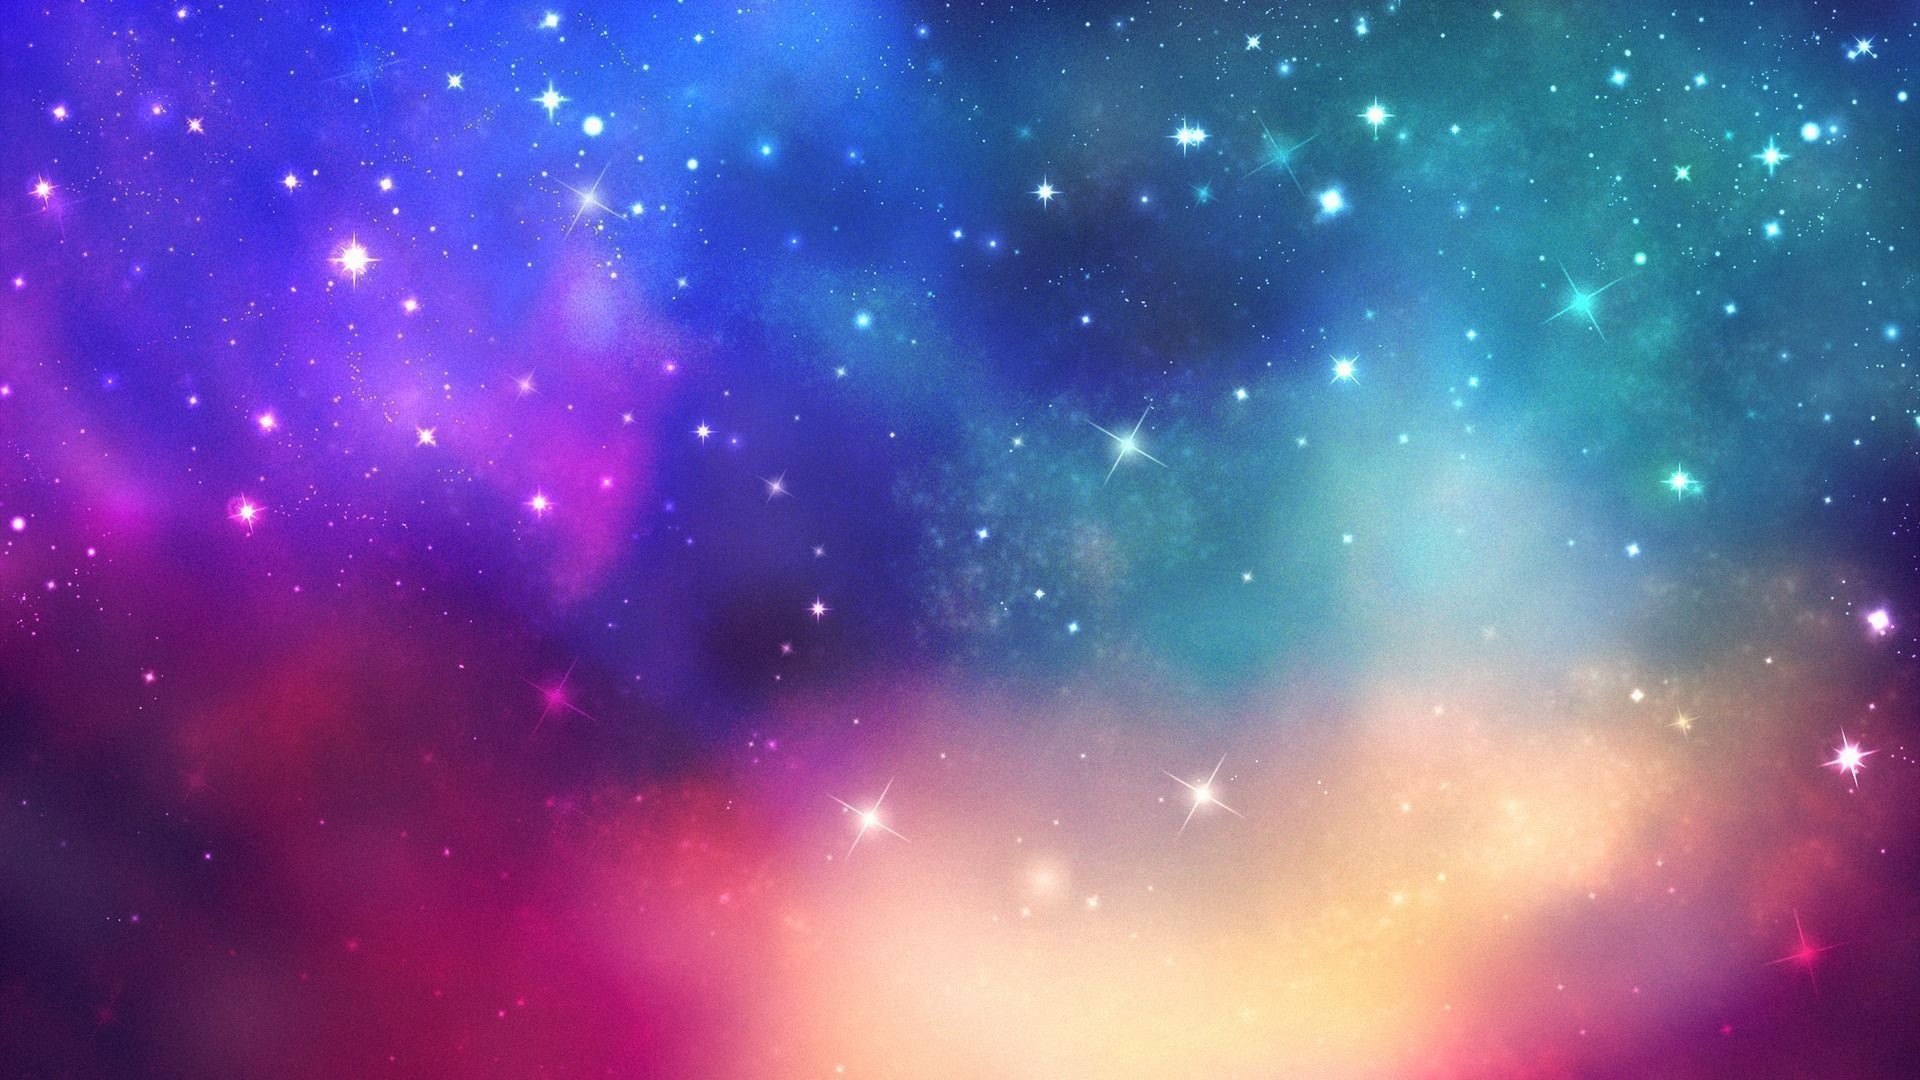 1920x1080 Tumblr Backgrounds Galaxy Star (page 2) - Pics about space